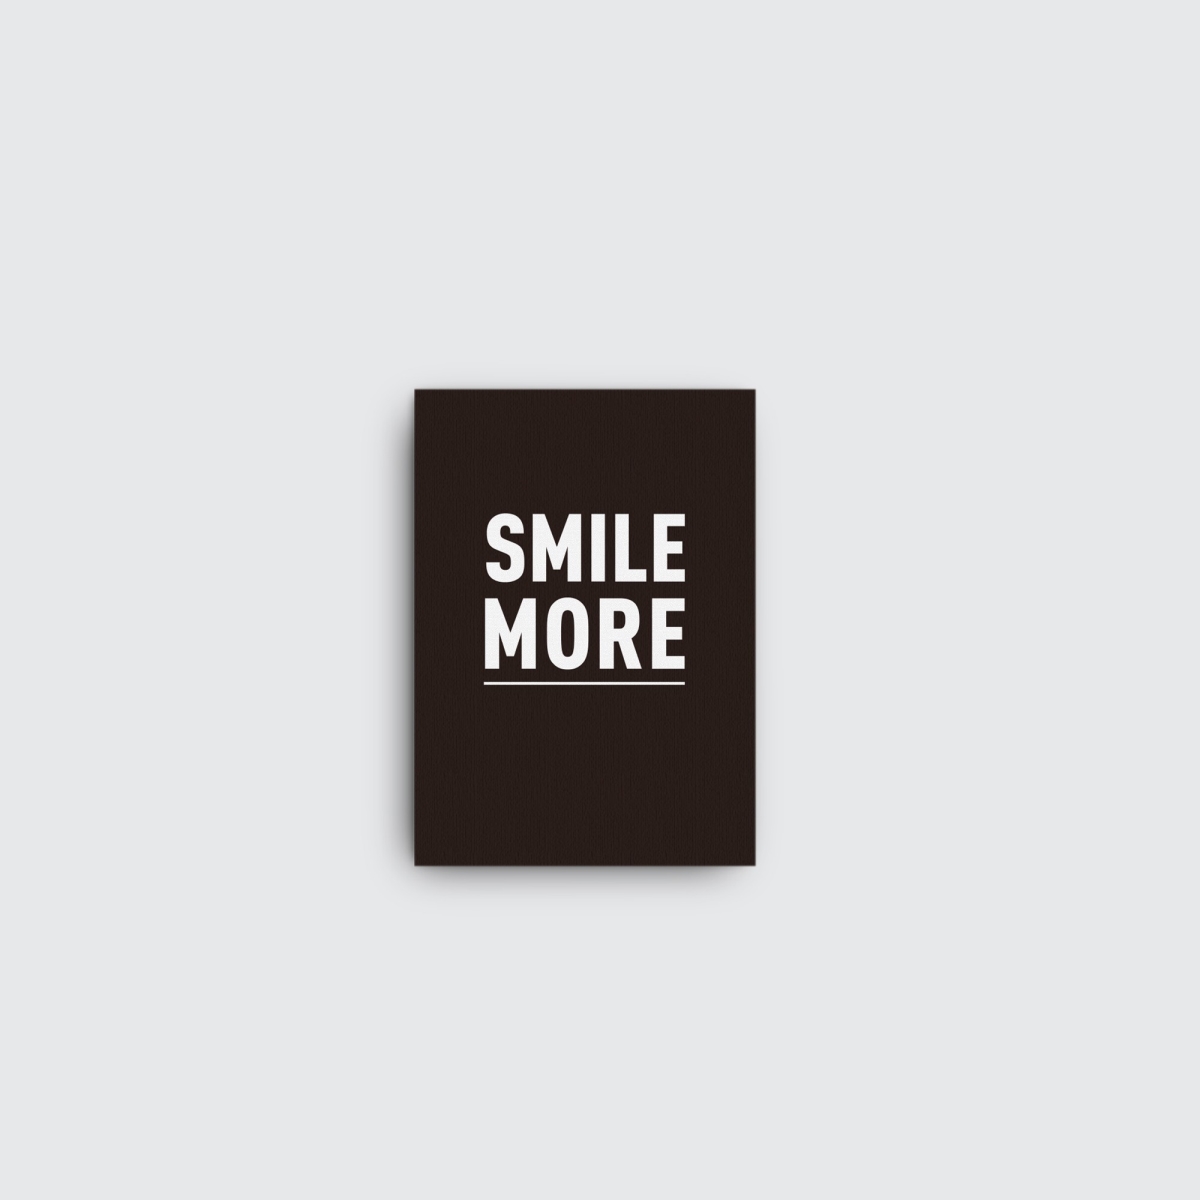 Jc00021-s Smile More 11 W X 16 H In.